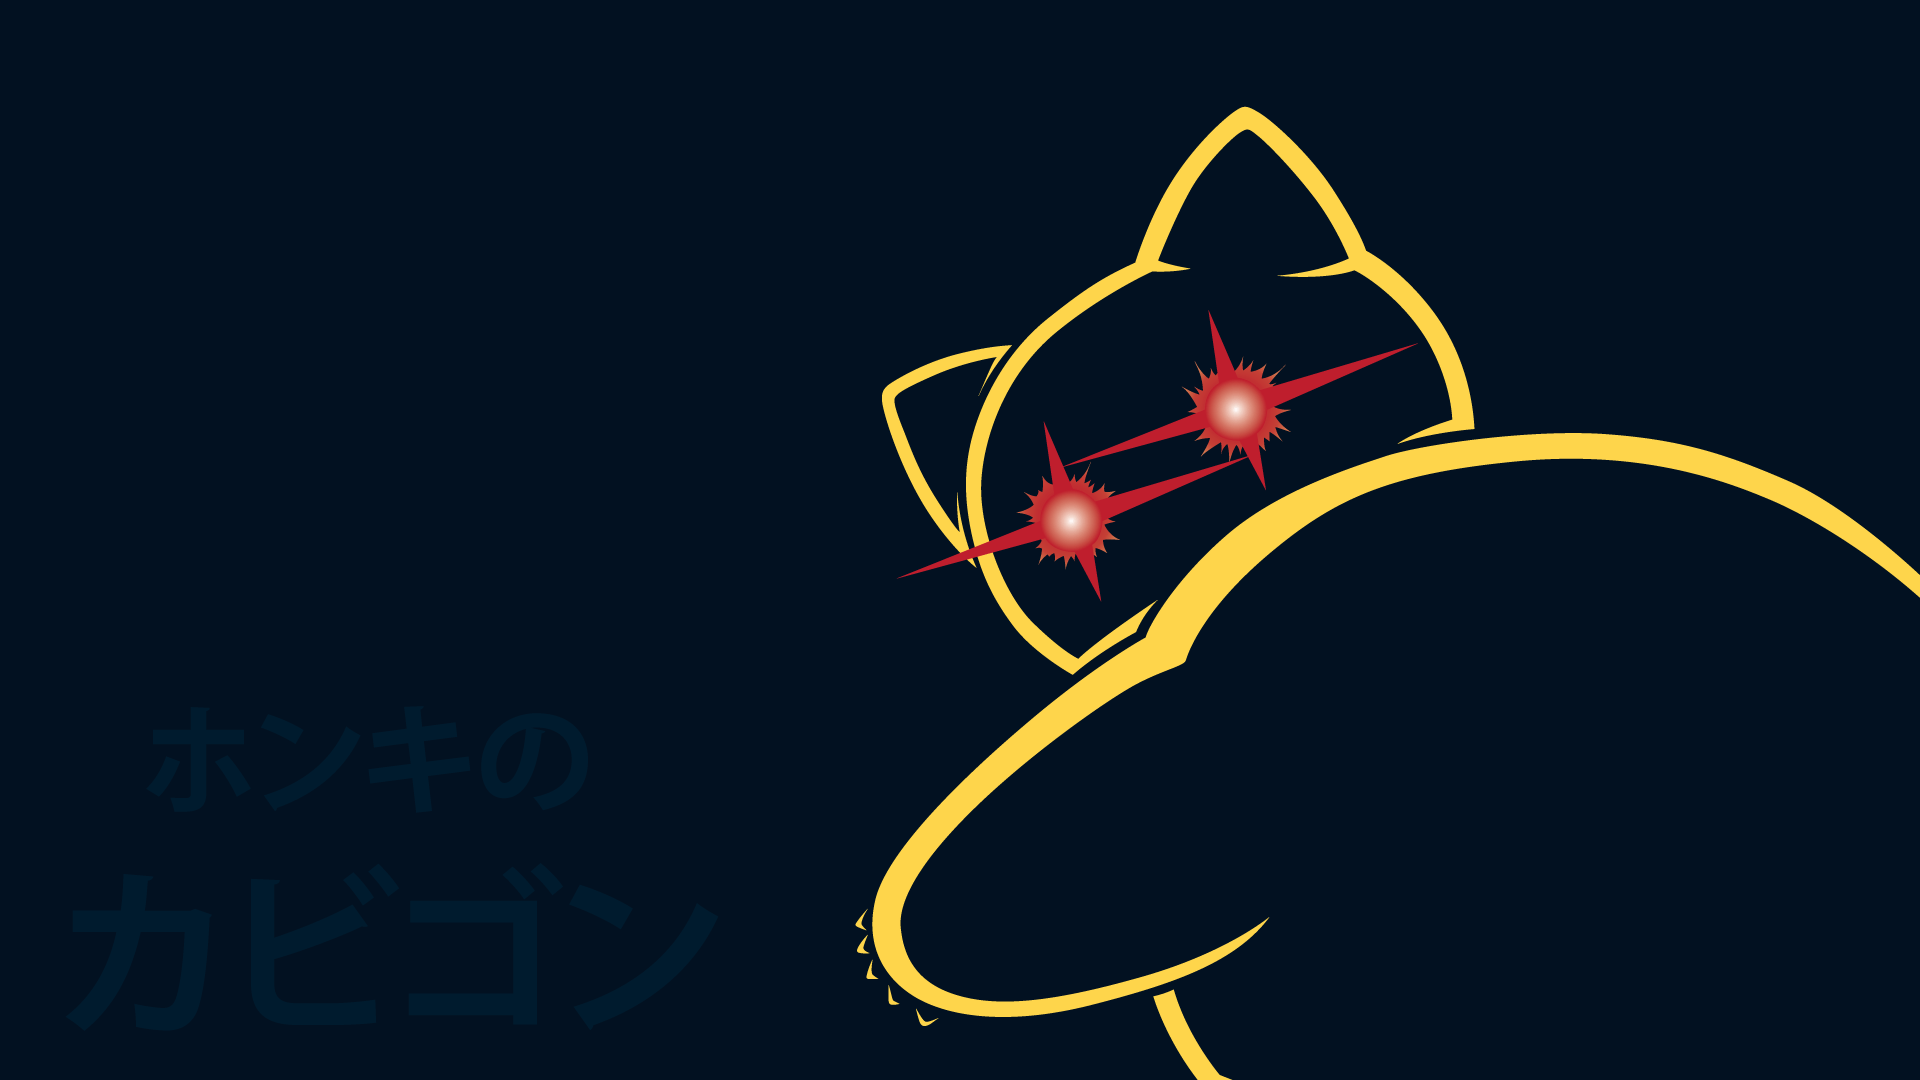 Request Snorlax with his new evil eyes wallpaper